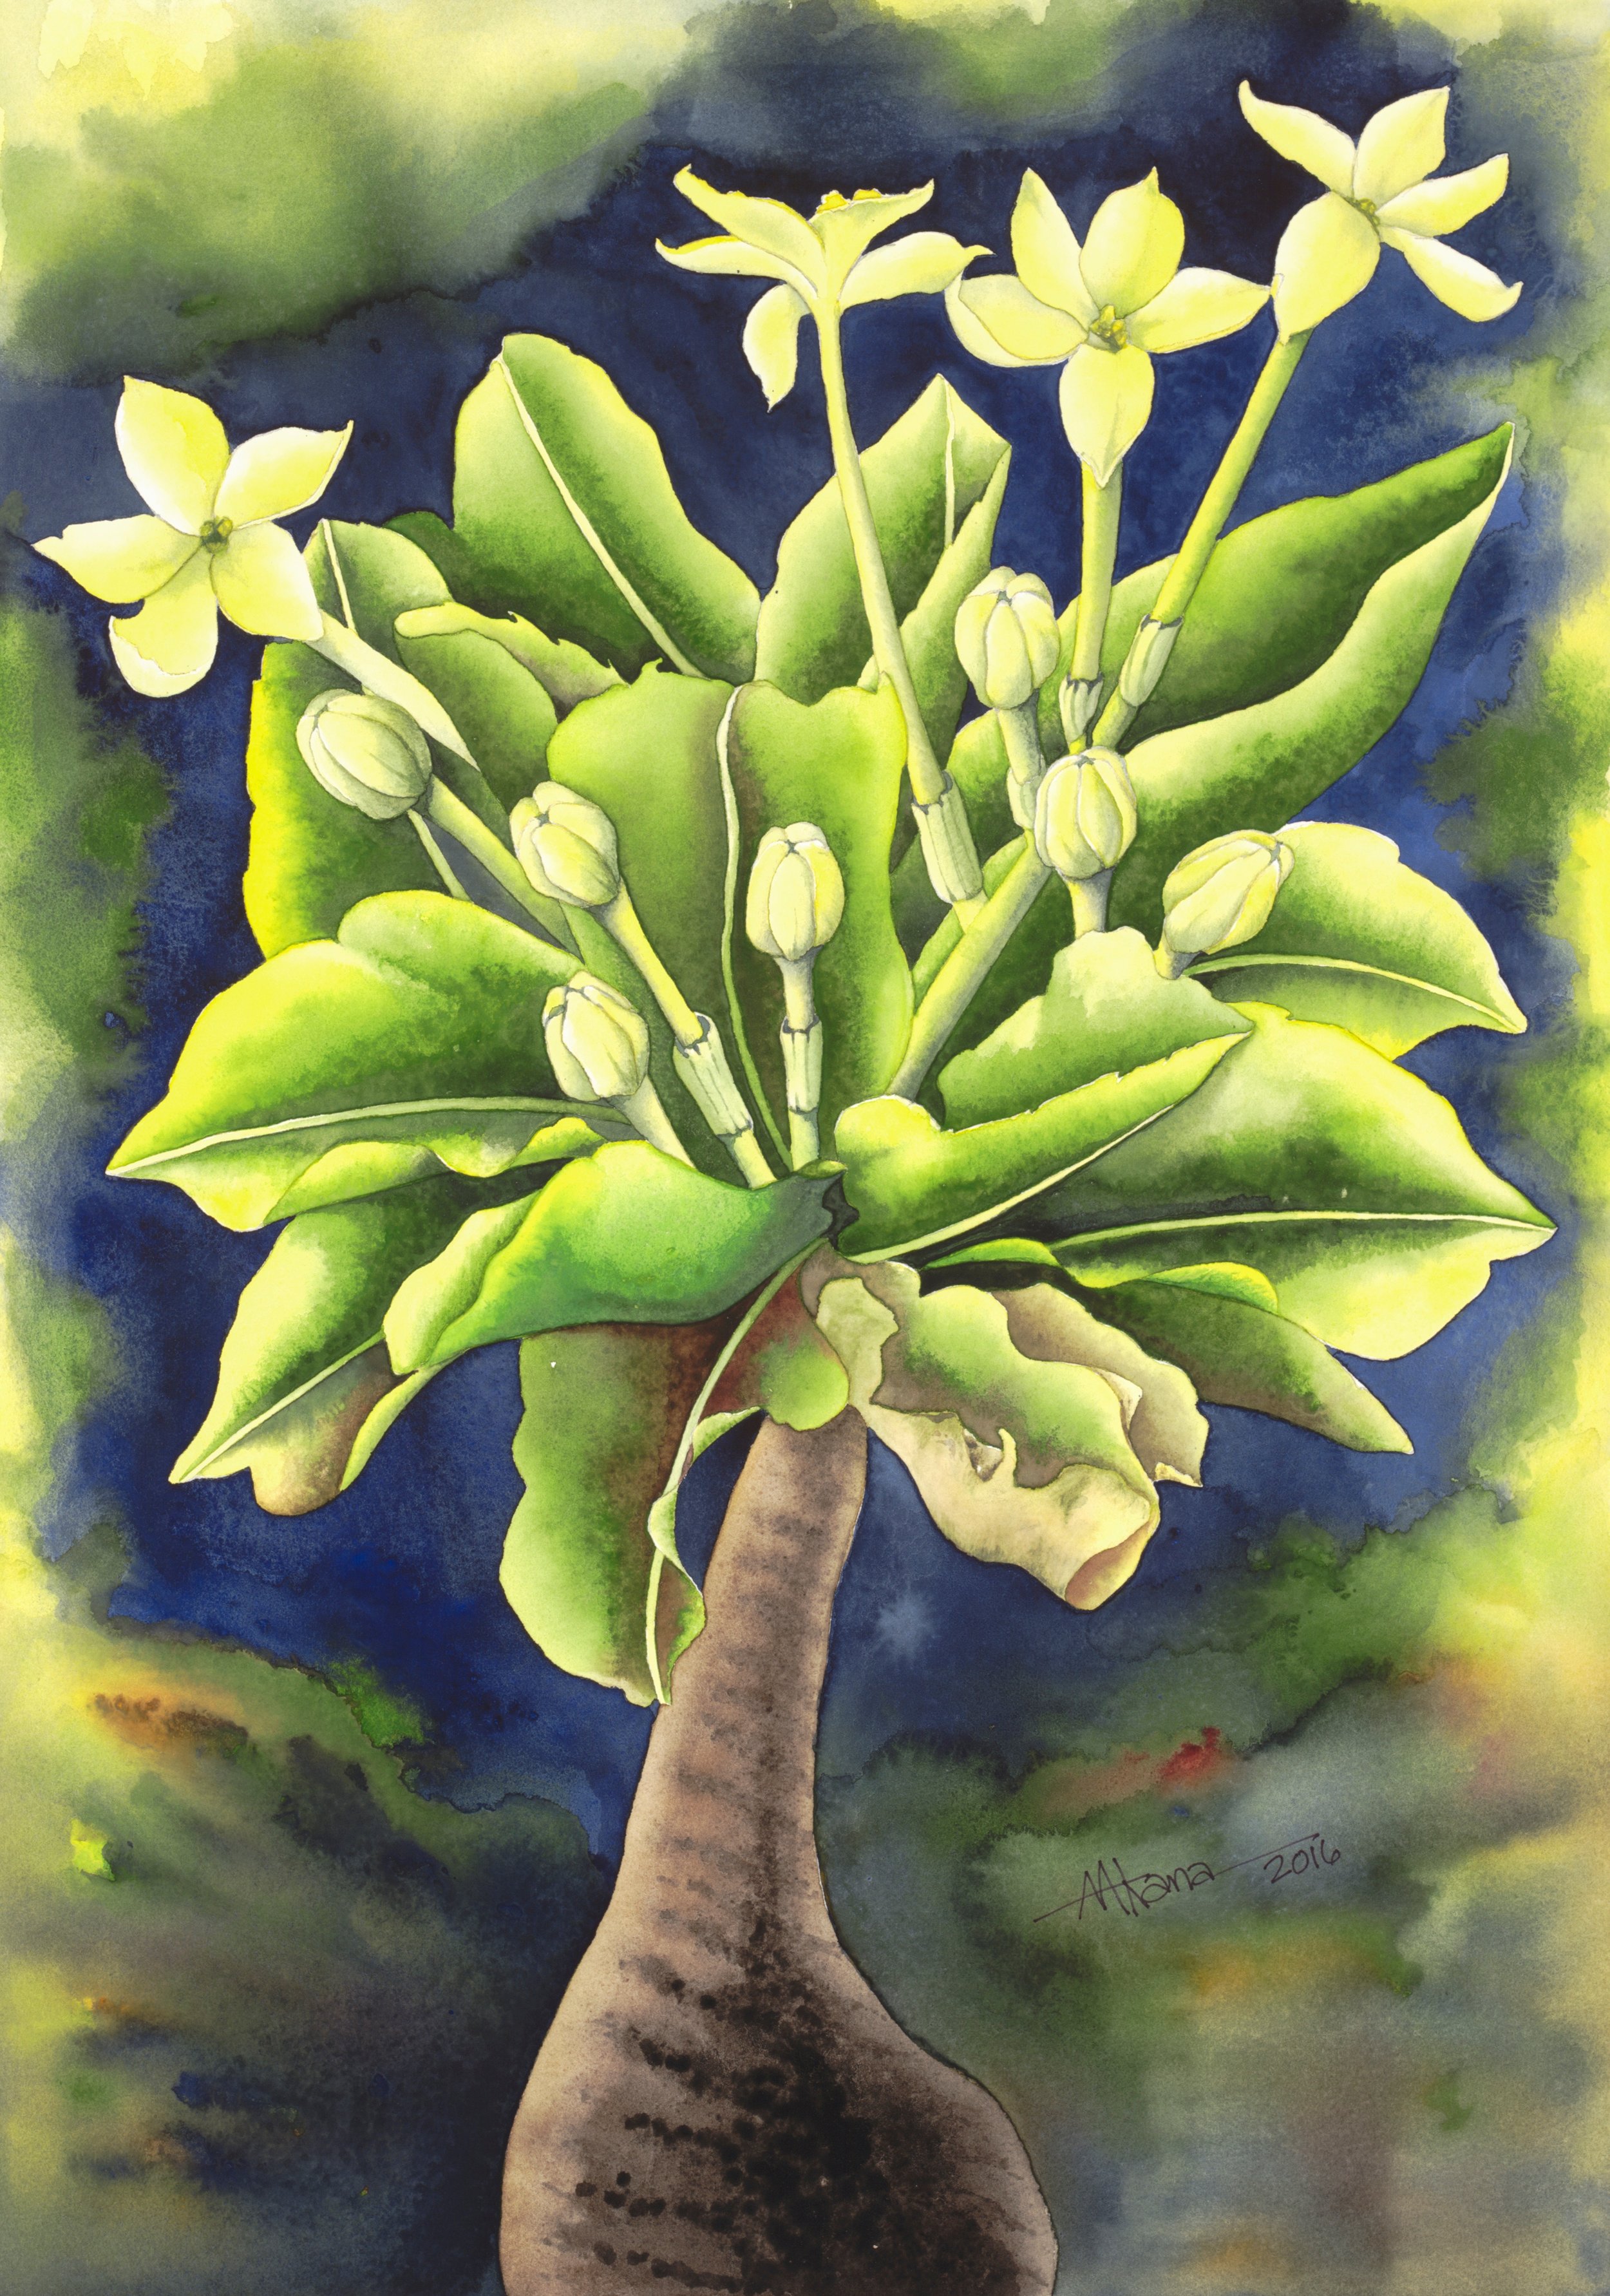   Alula   Brighamia insignis   Alula were once found on the windswept sea cliffs of Niihau and Kauai and are now believed to be extinct in the wild, except for one remaining plant (as of 2016), clinging to the high cliffs of the Na Pali Coast on Kaua